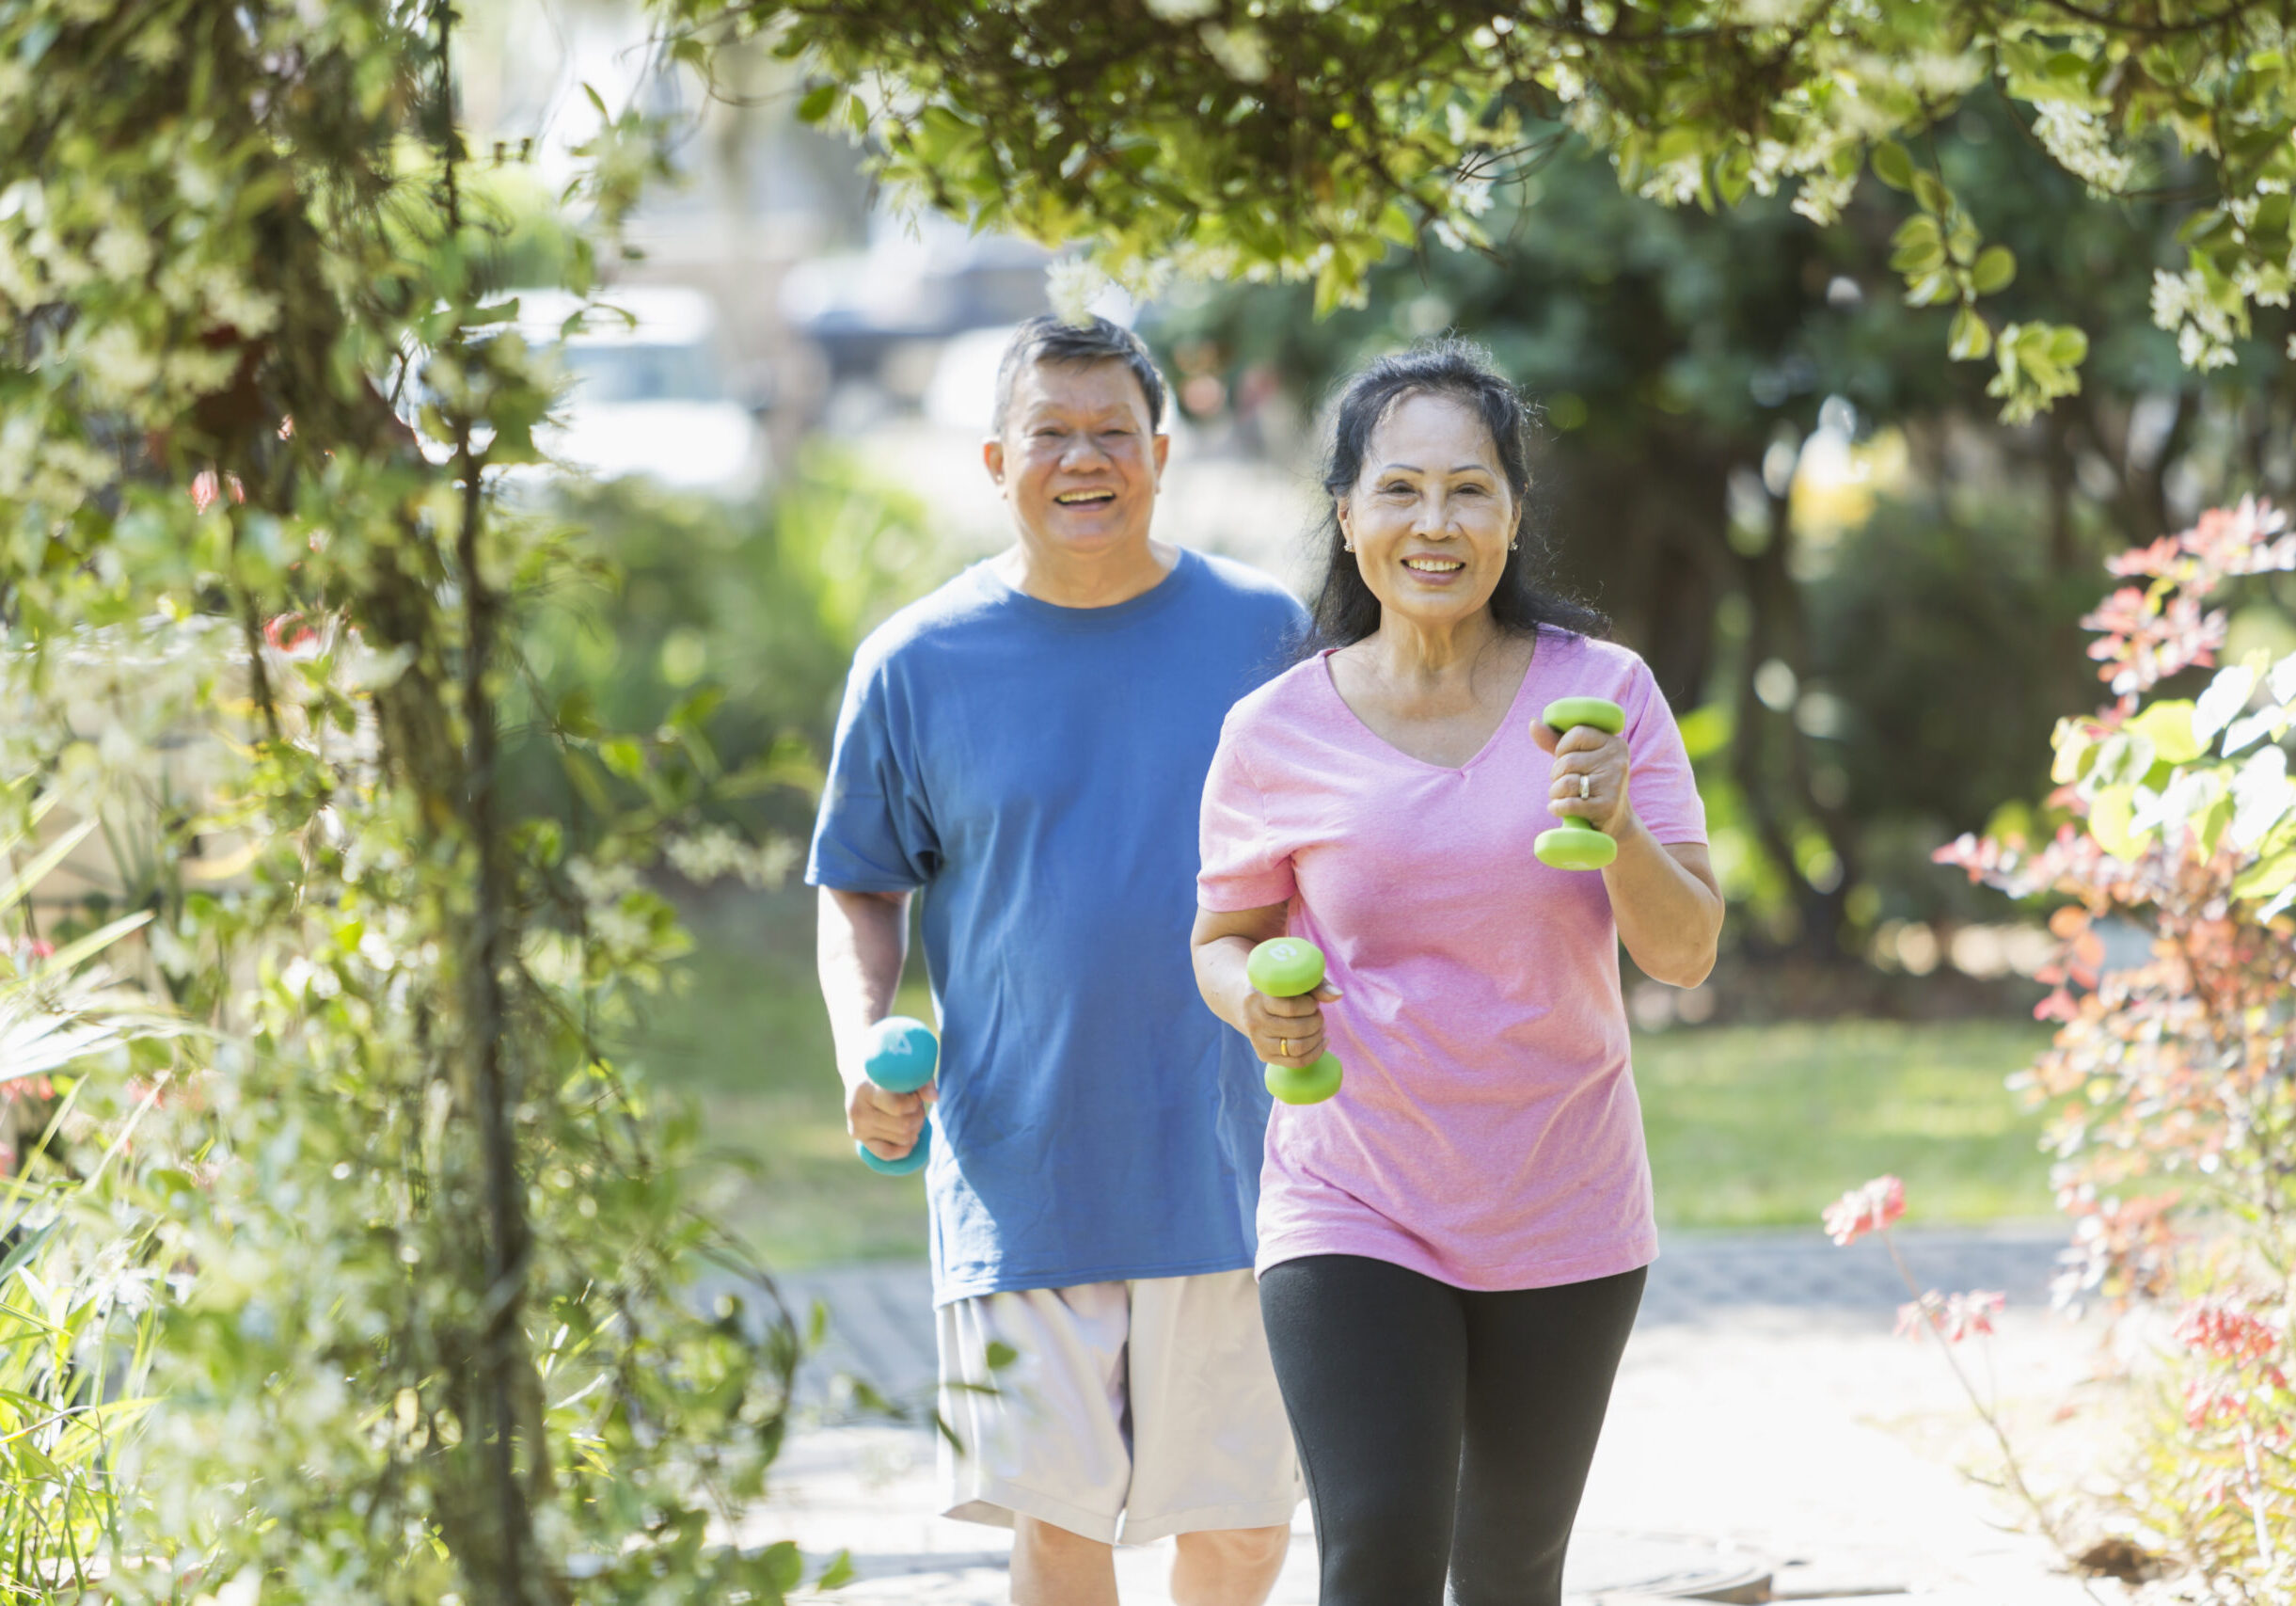 A senior Asian couple in the park on a sunny day, exercising together. They are powerwalking or jogging with dumbbells in their hands.